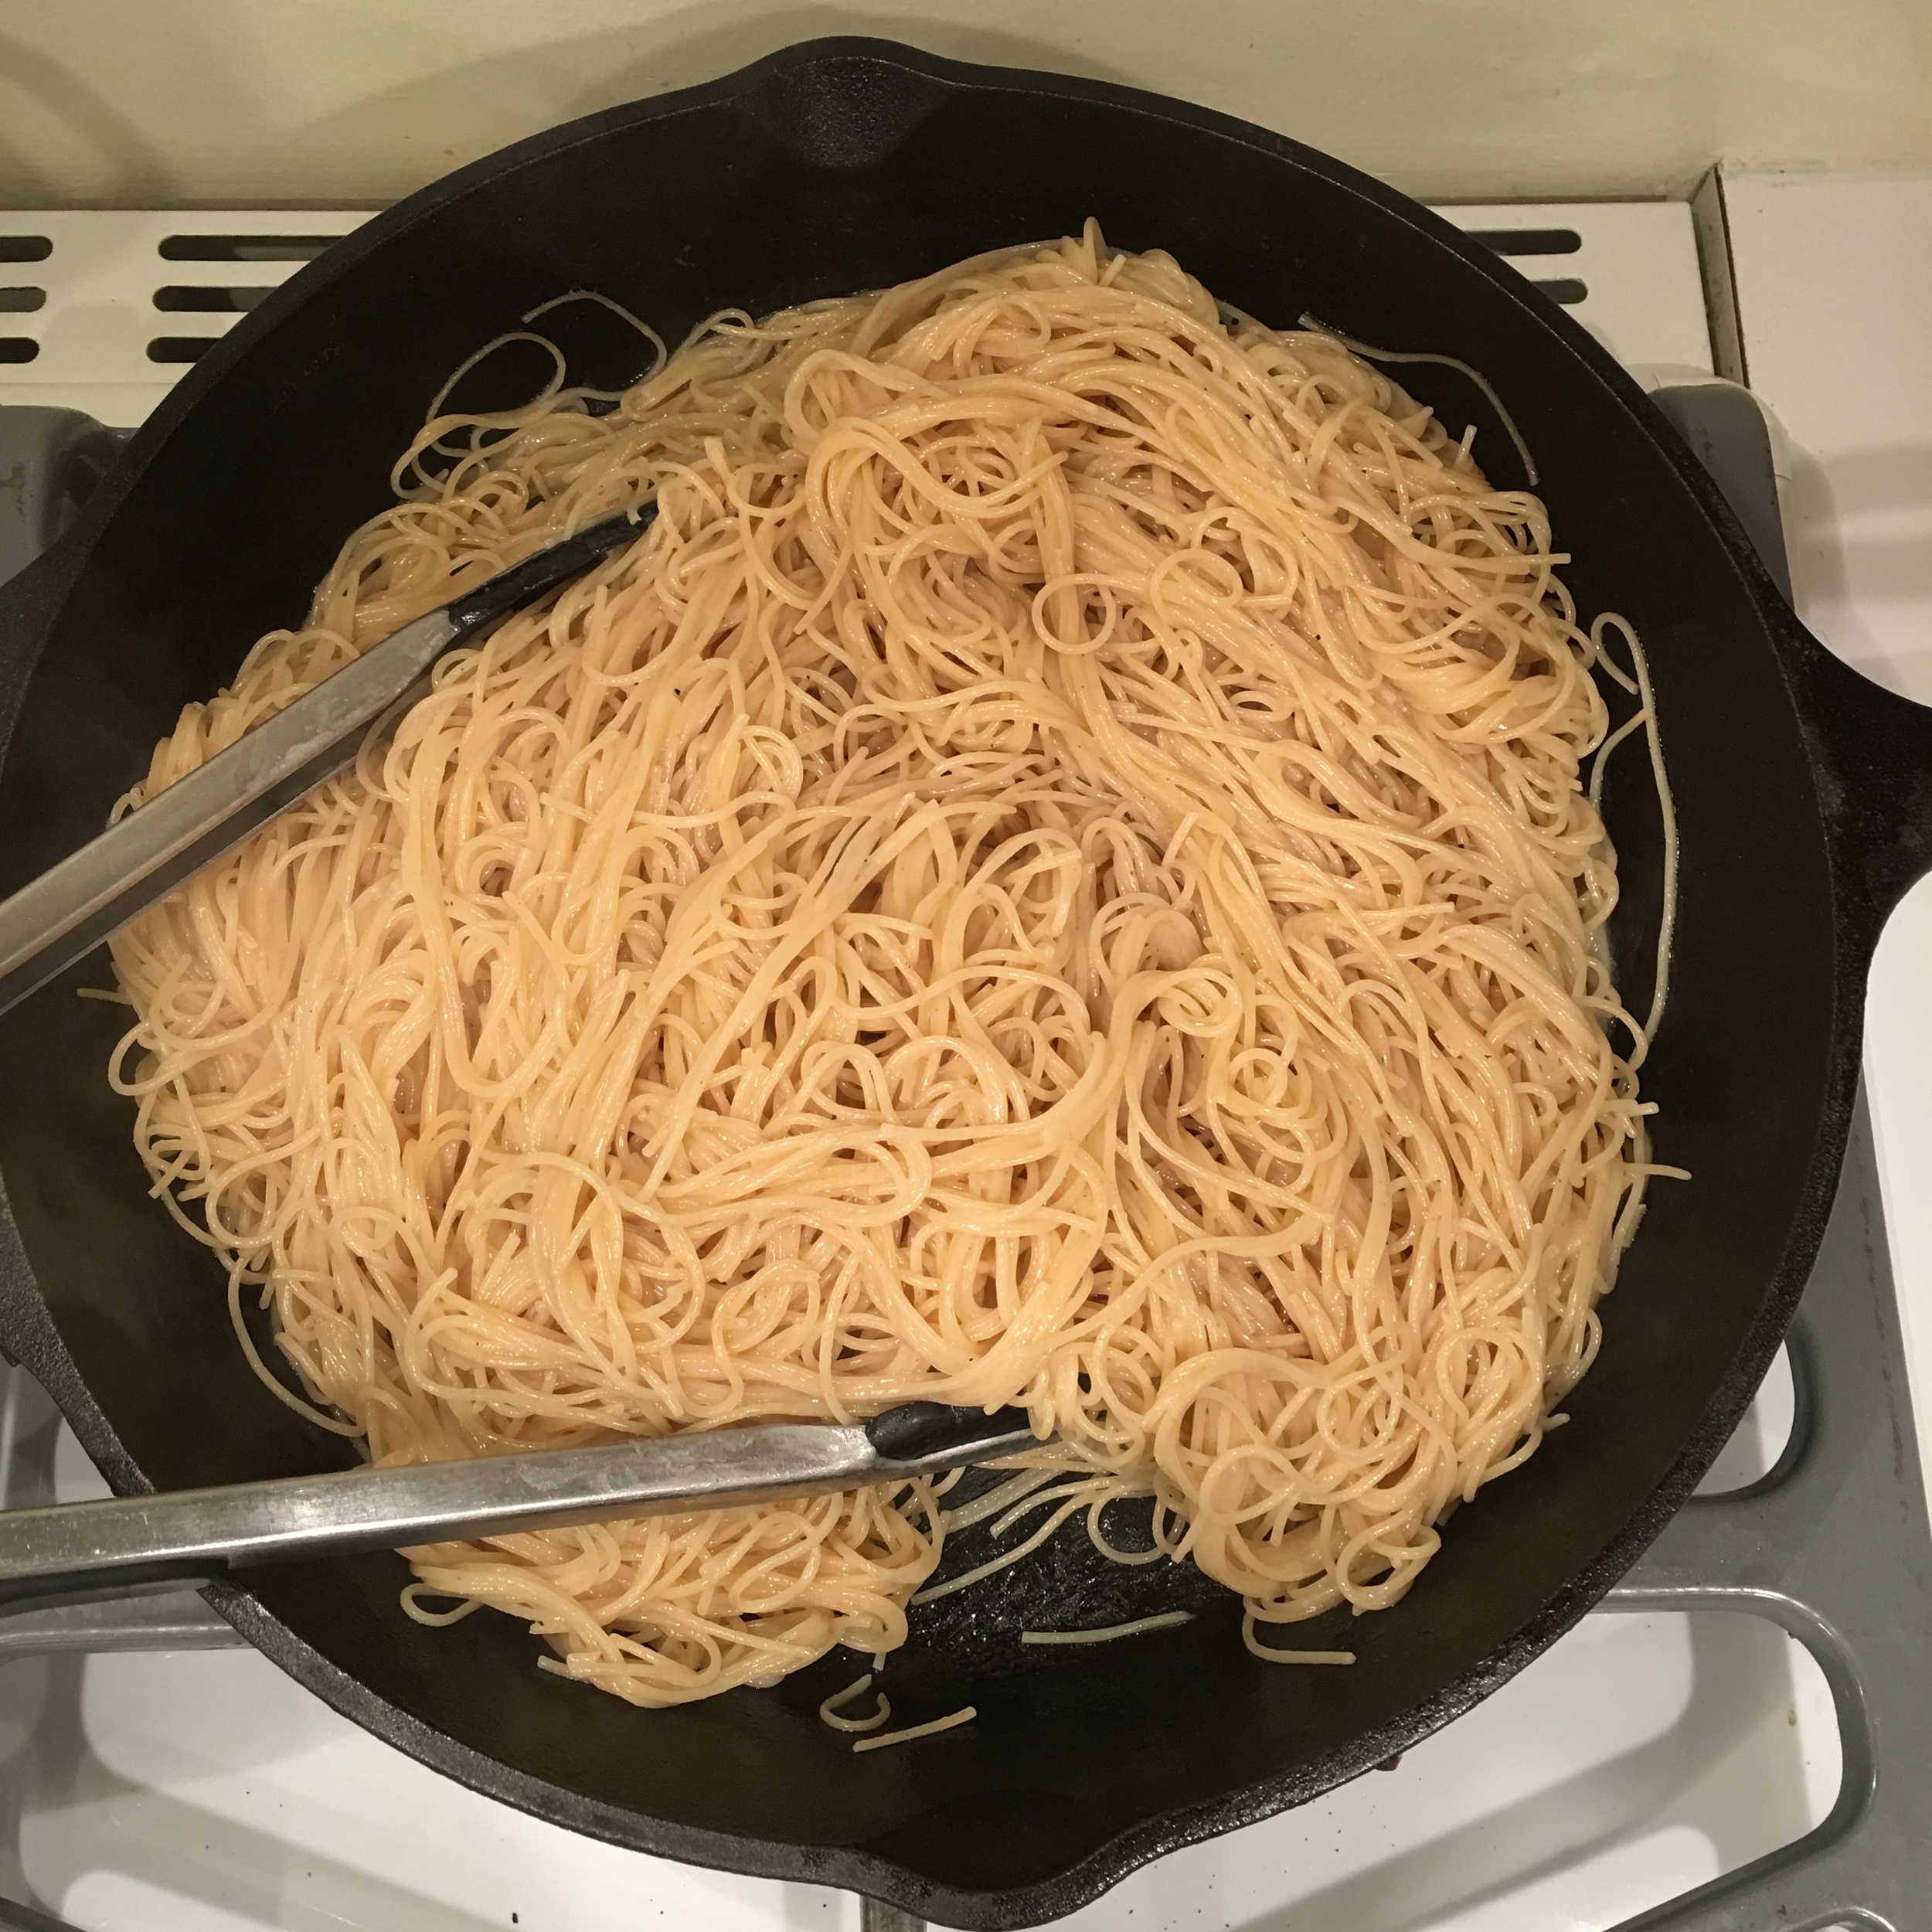 A New Way to Cook Pasta?